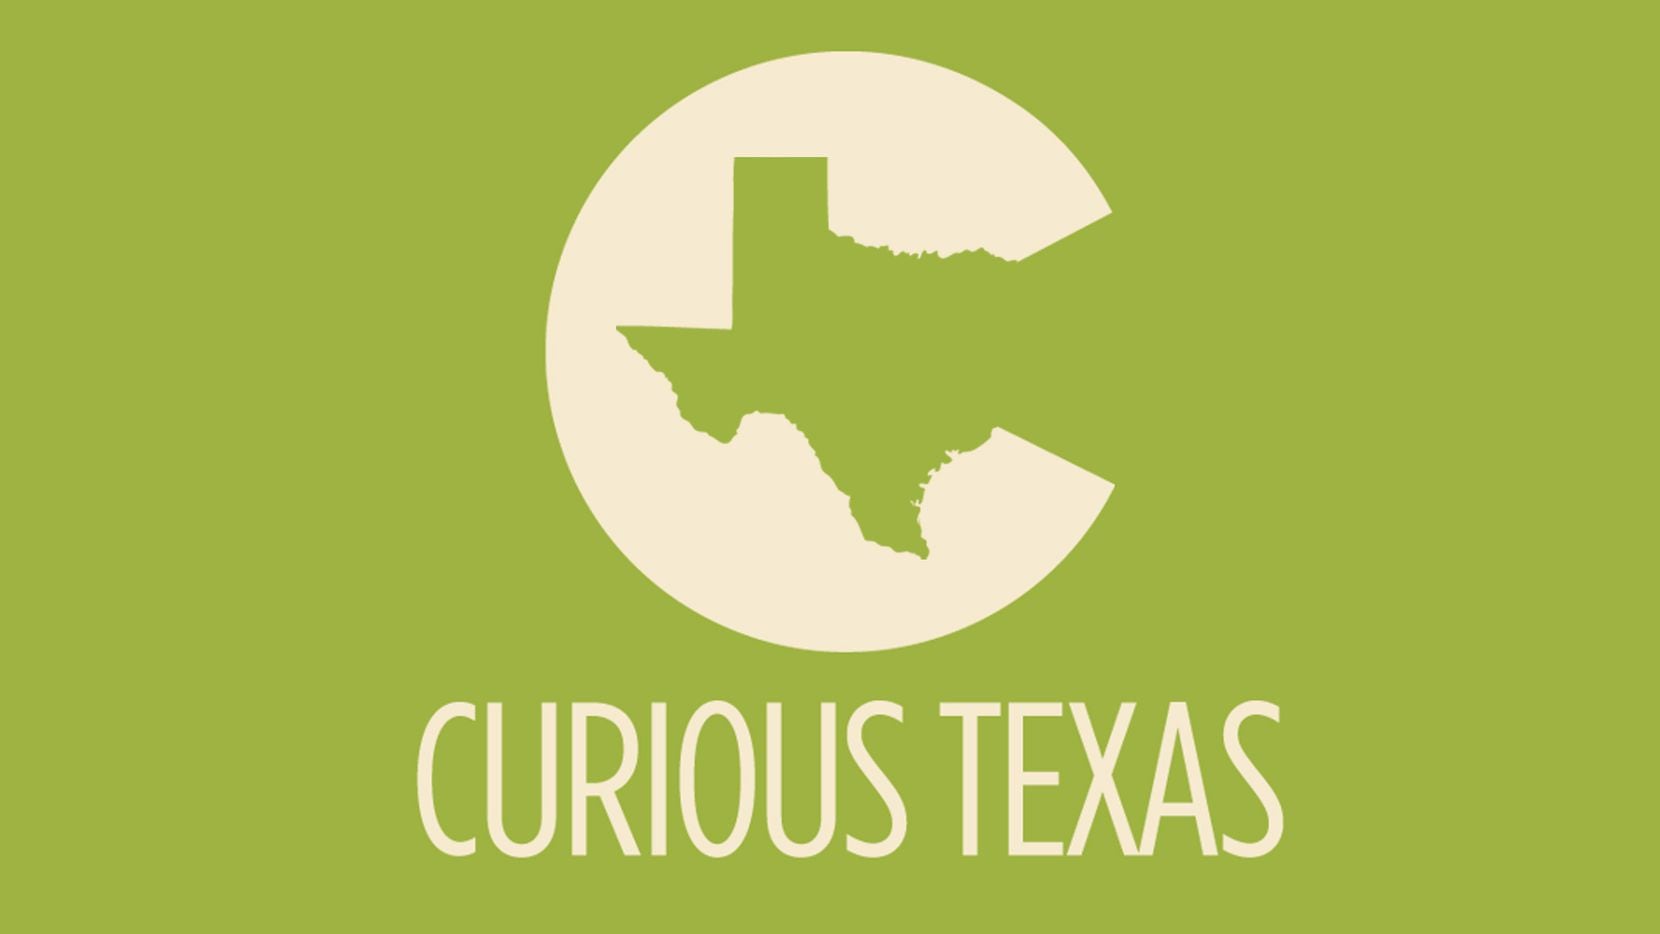 Introducing Curious Texas, a special project from The Dallas Morning News. You ask questions, our journalists find answers.